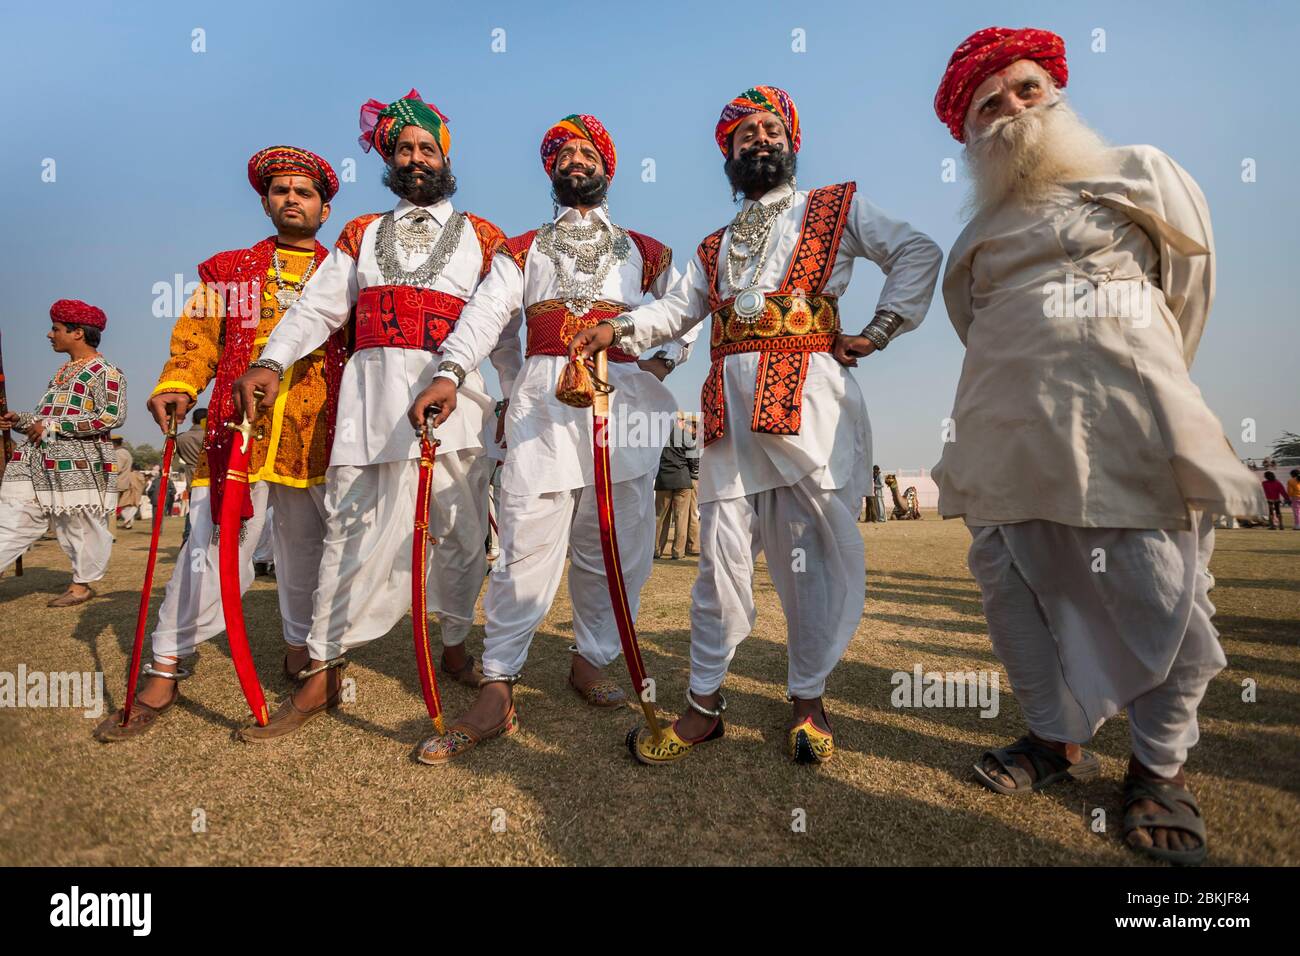 India, Rajasthan, Bikaner, Camel Festival, group of men wearing traditional clothes Stock Photo